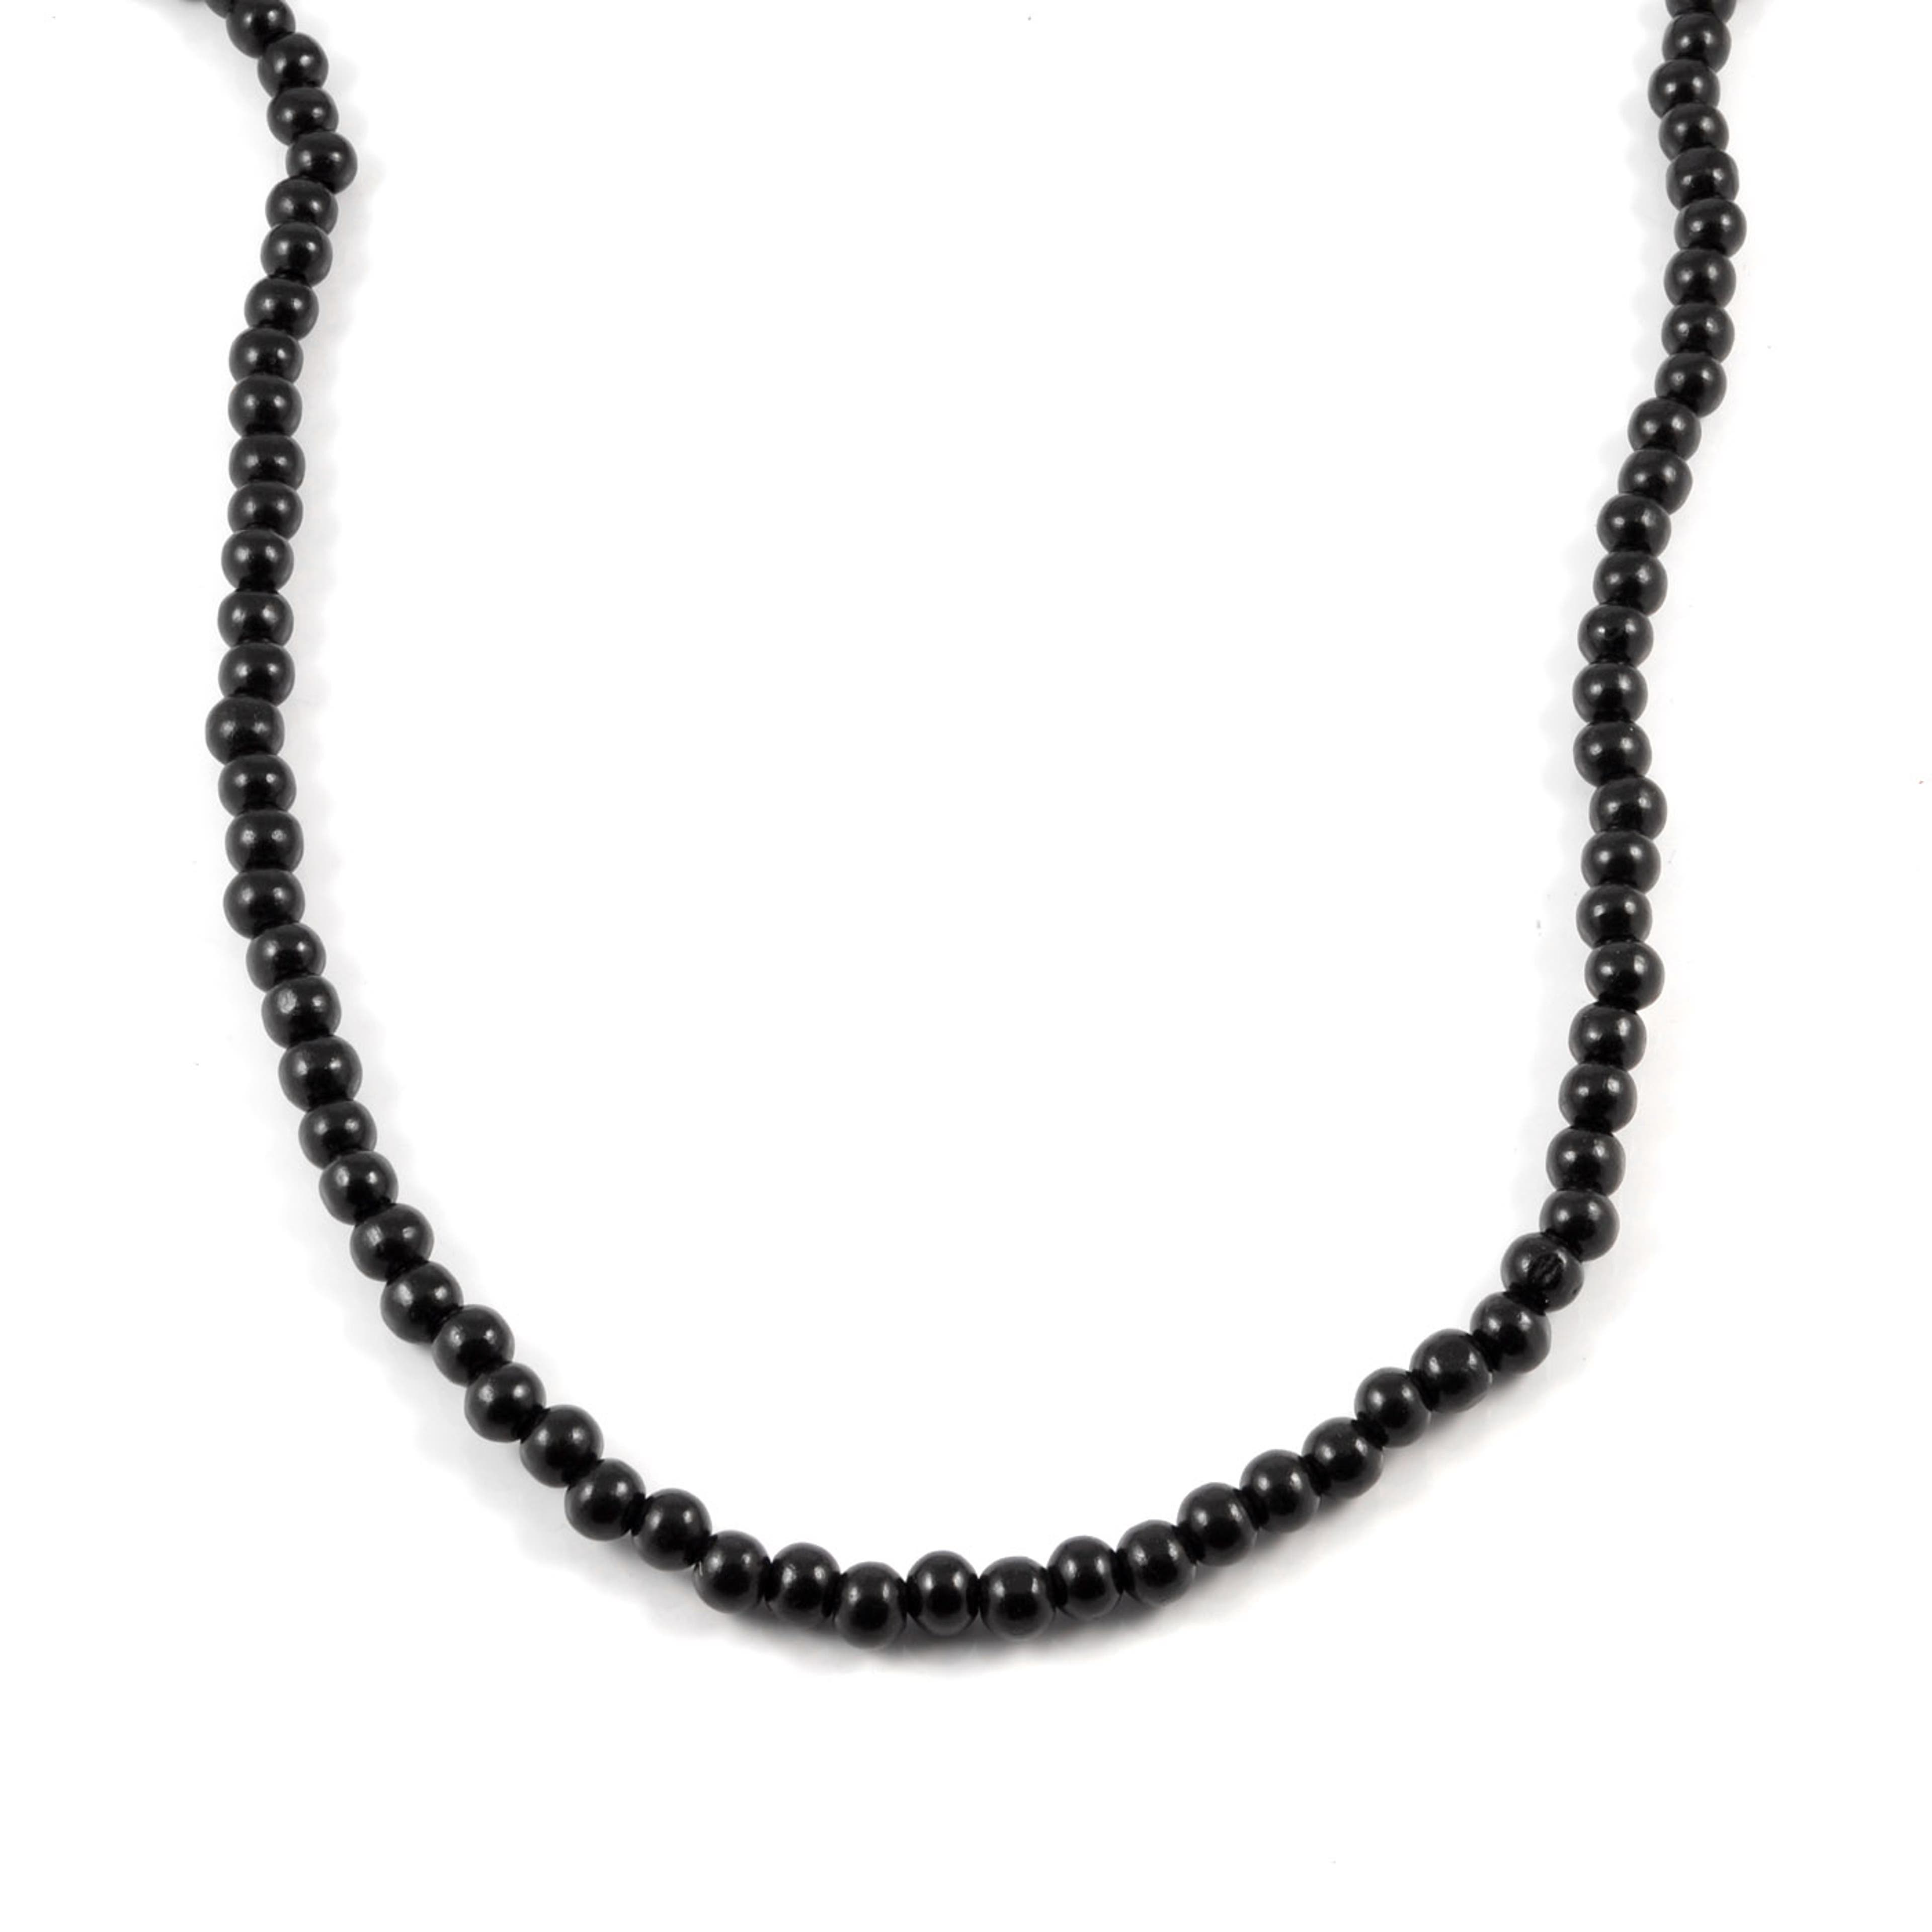 Black Wooden Pearl Necklace